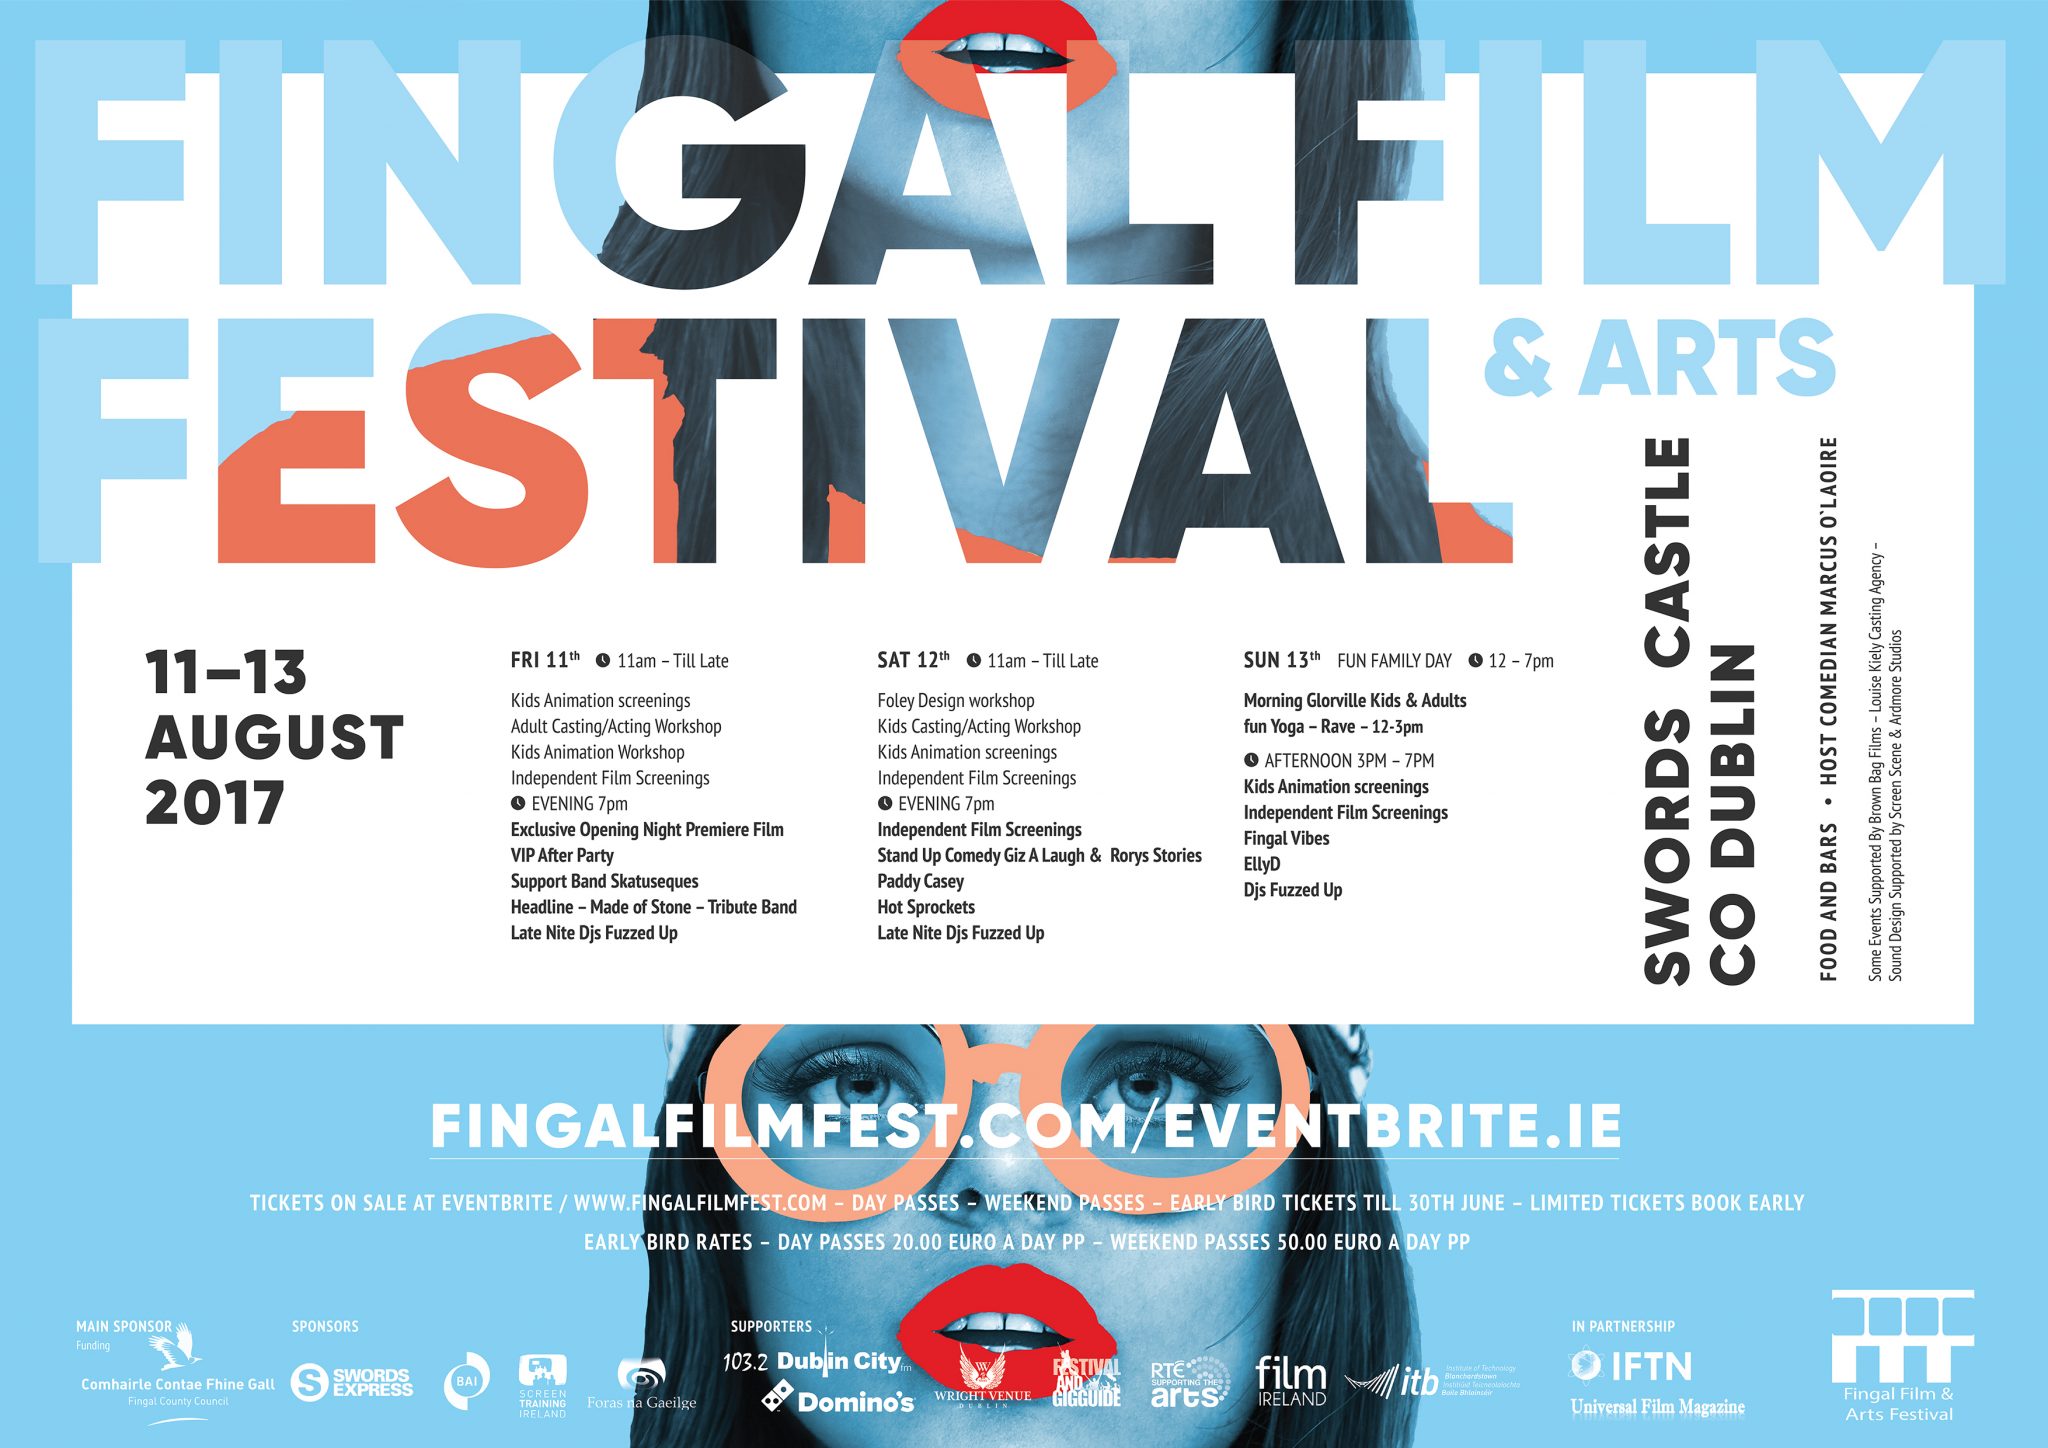 Fingal Film and Arts Festival